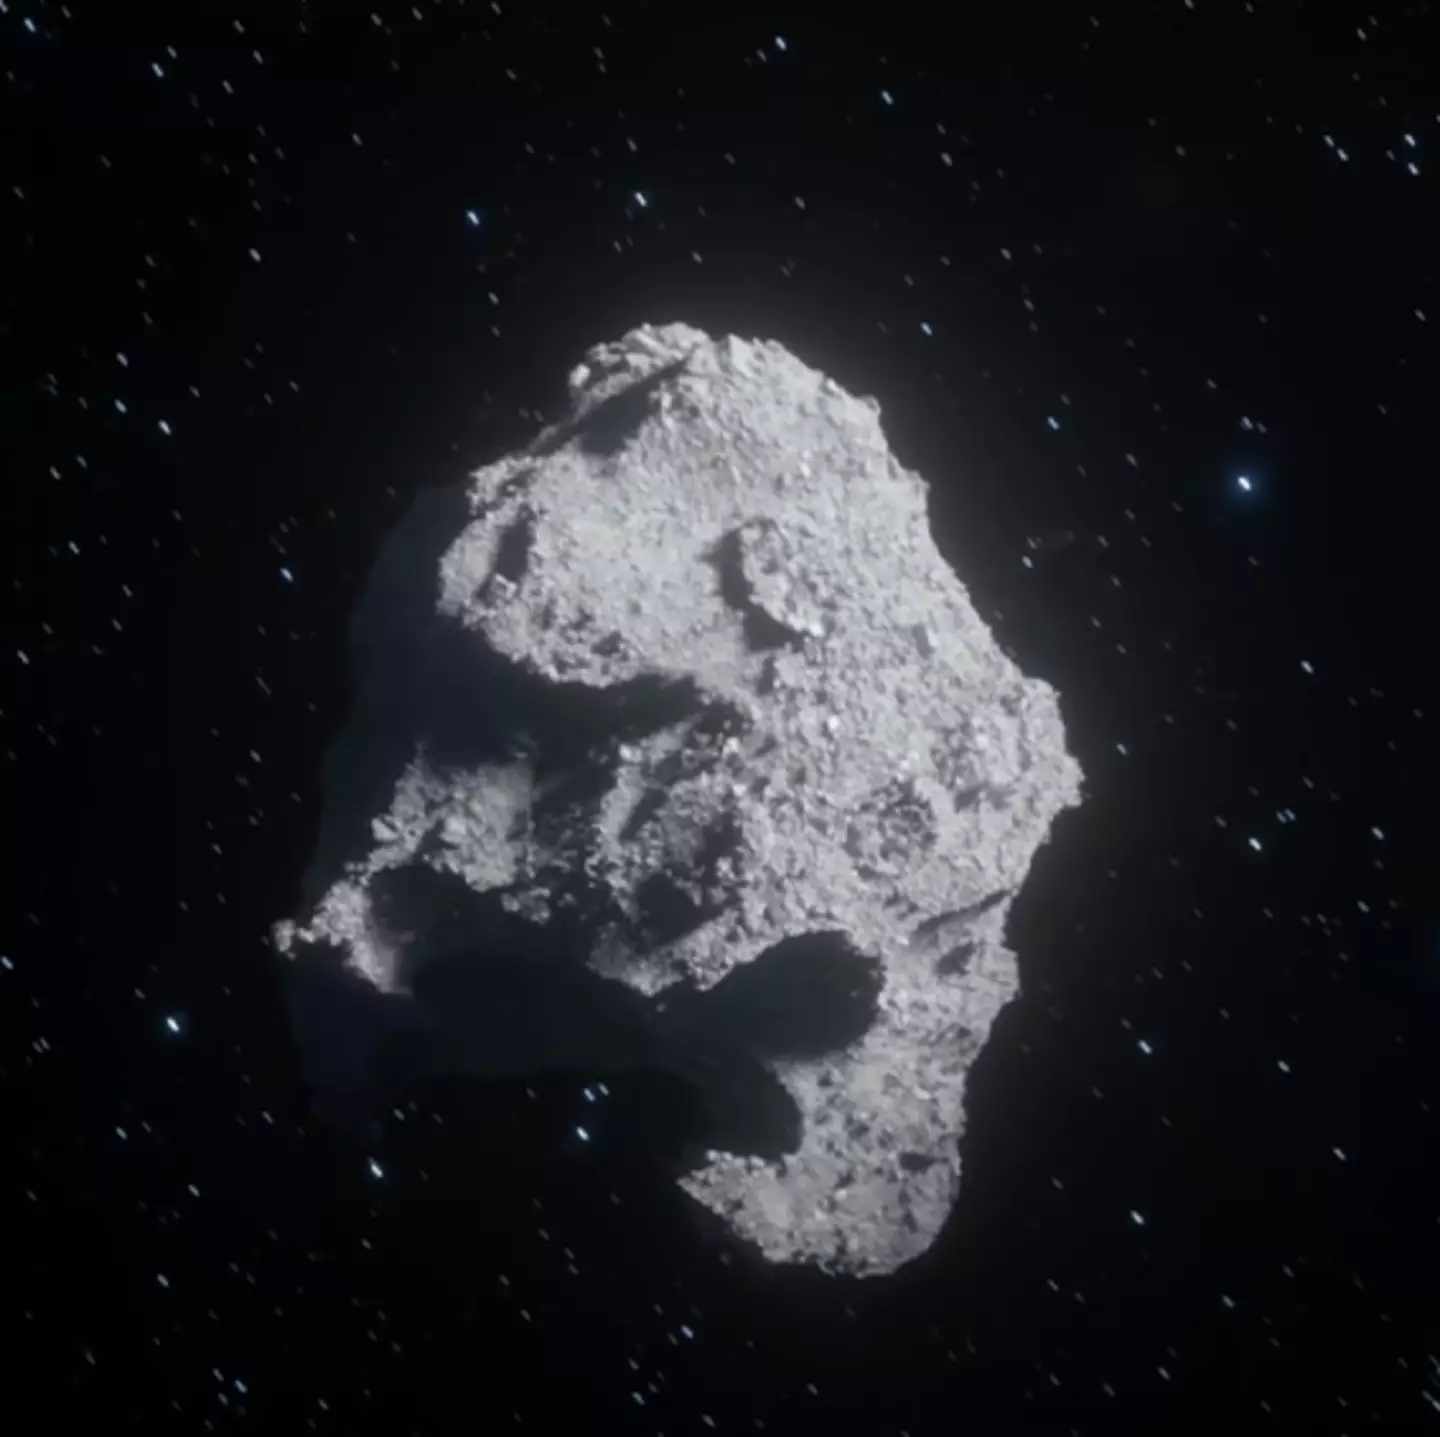 Realistic video shows what would happen if the dinosaur-killing asteroid hit Earth today